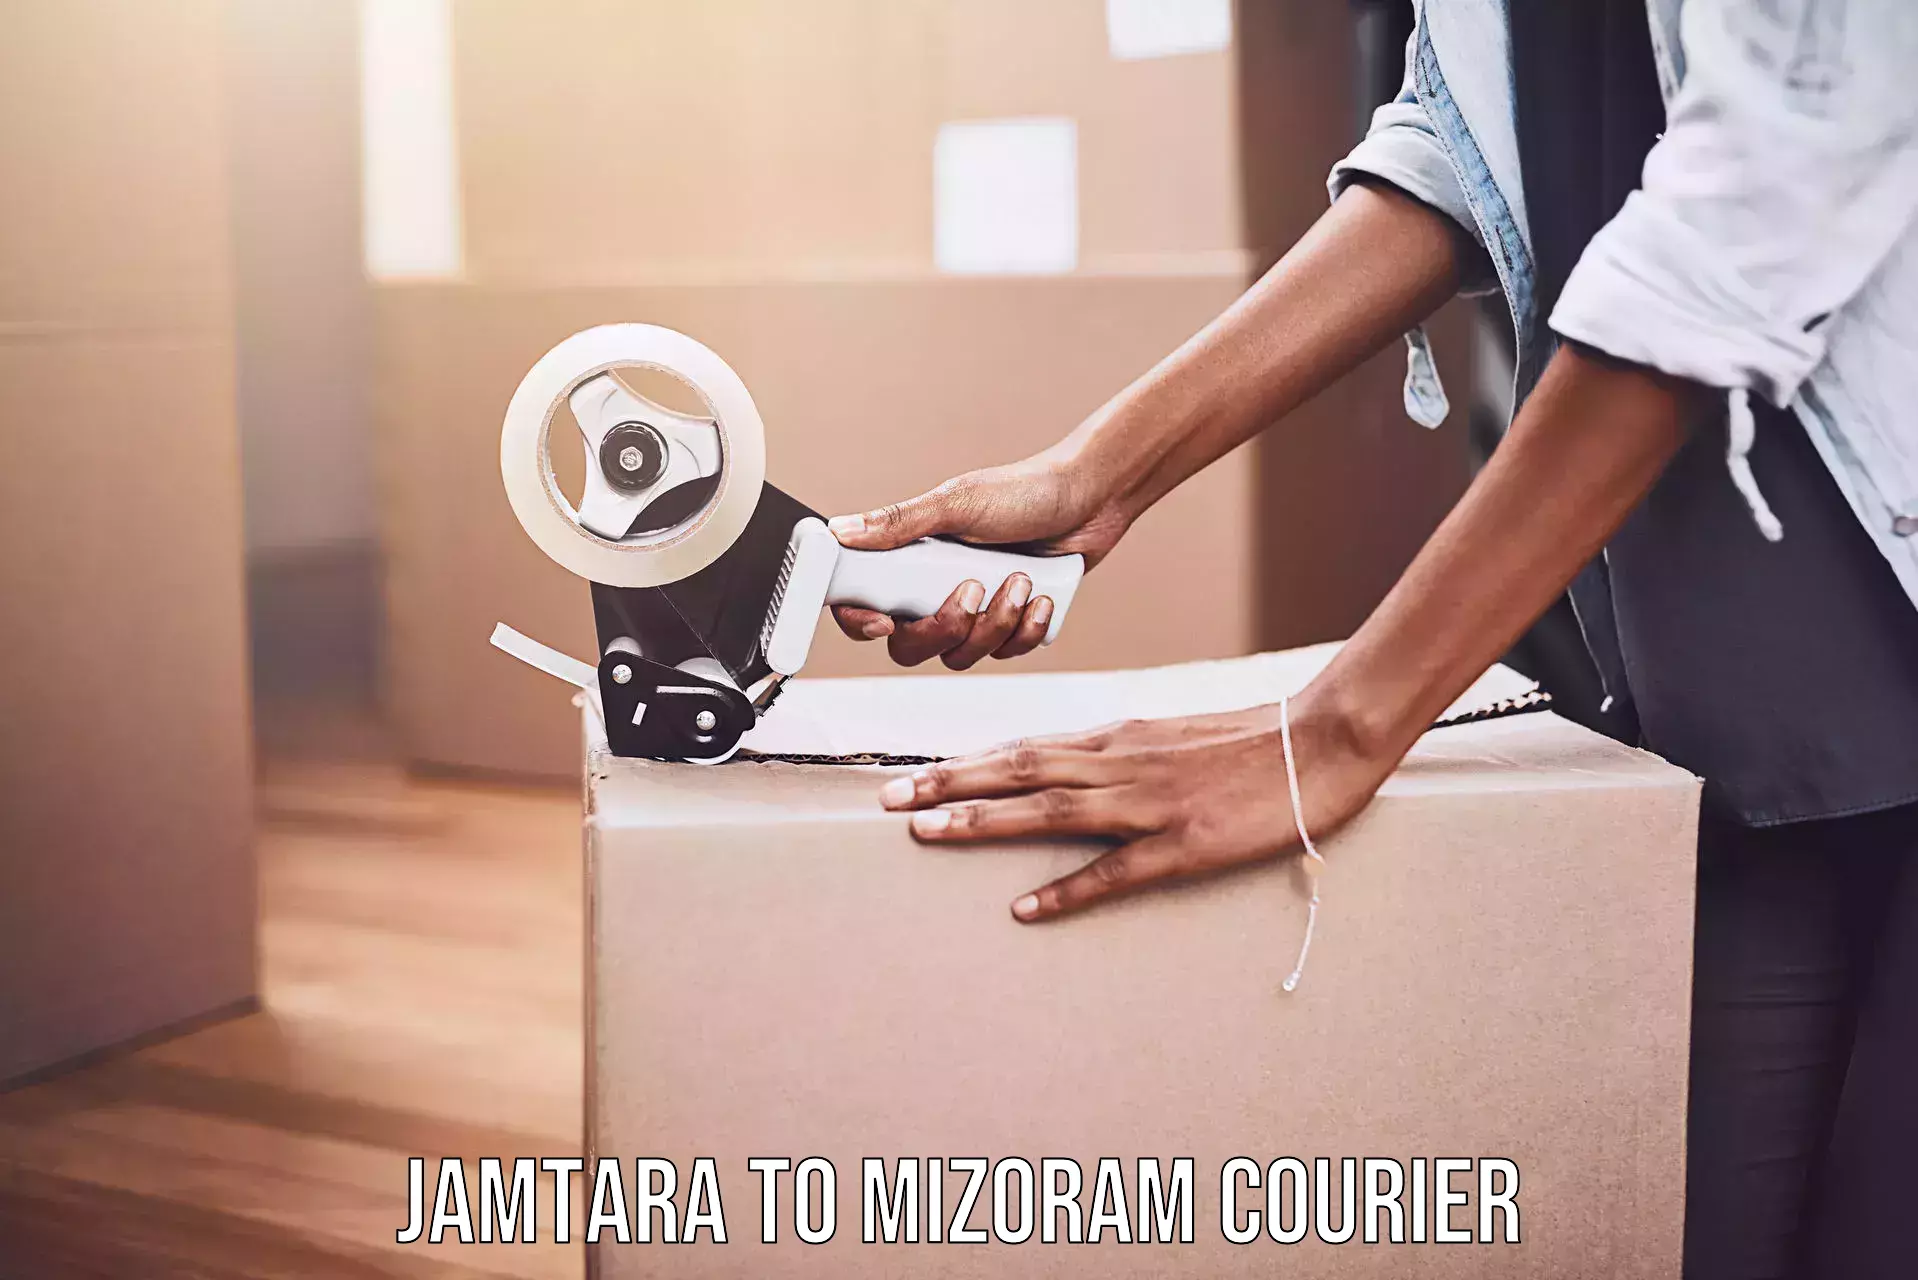 User-friendly delivery service Jamtara to Darlawn